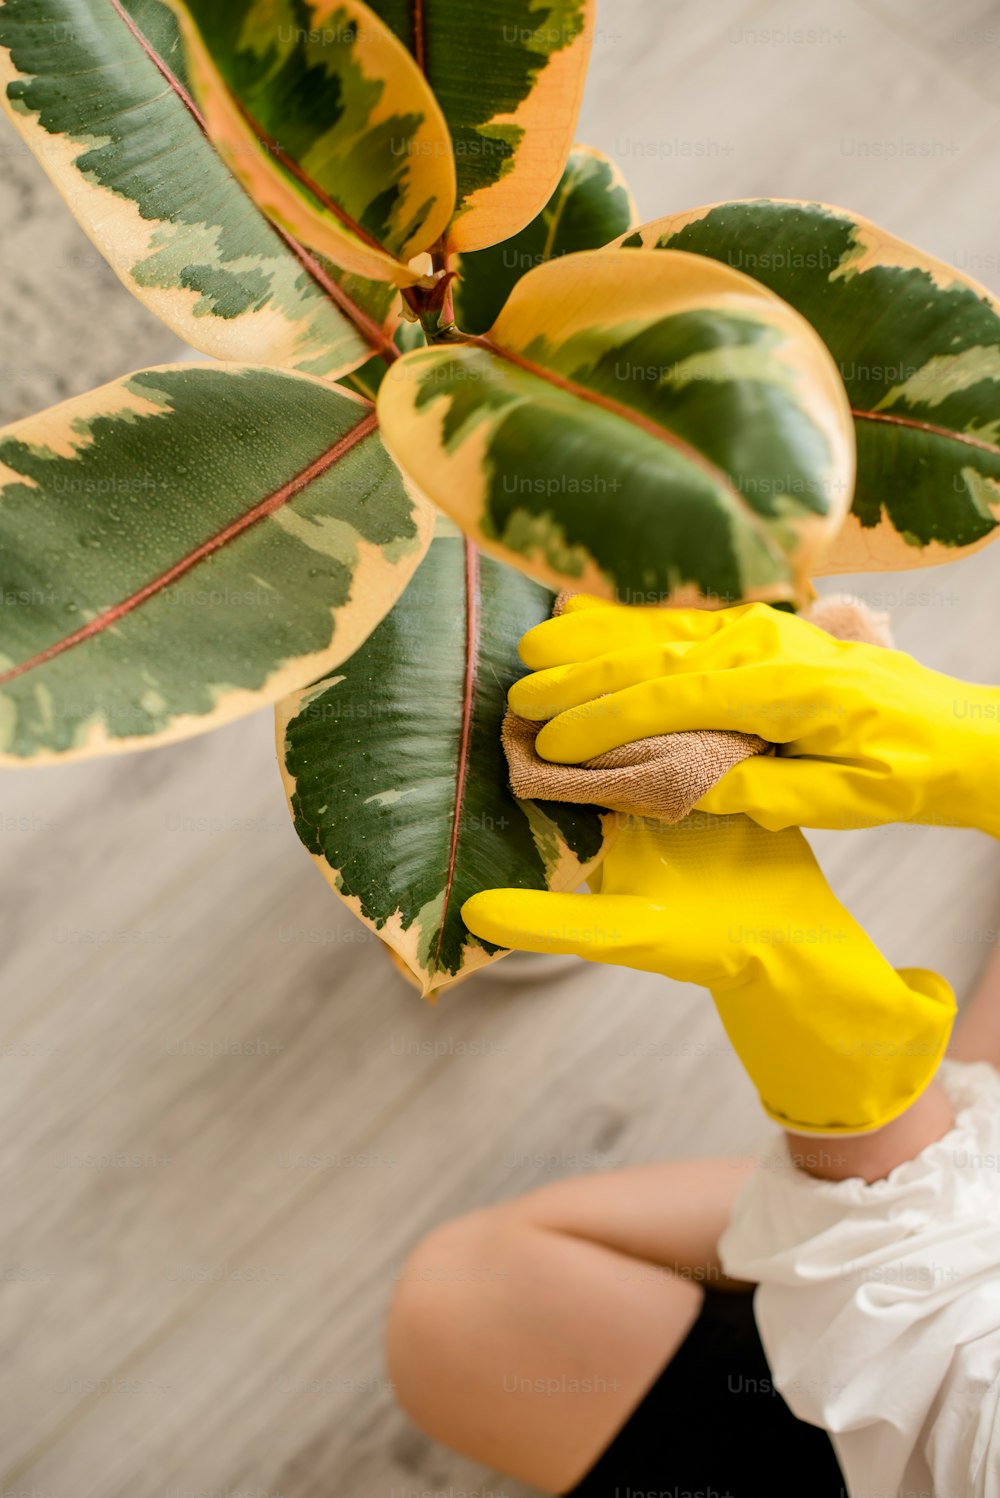 a person wearing yellow gloves holding a plant